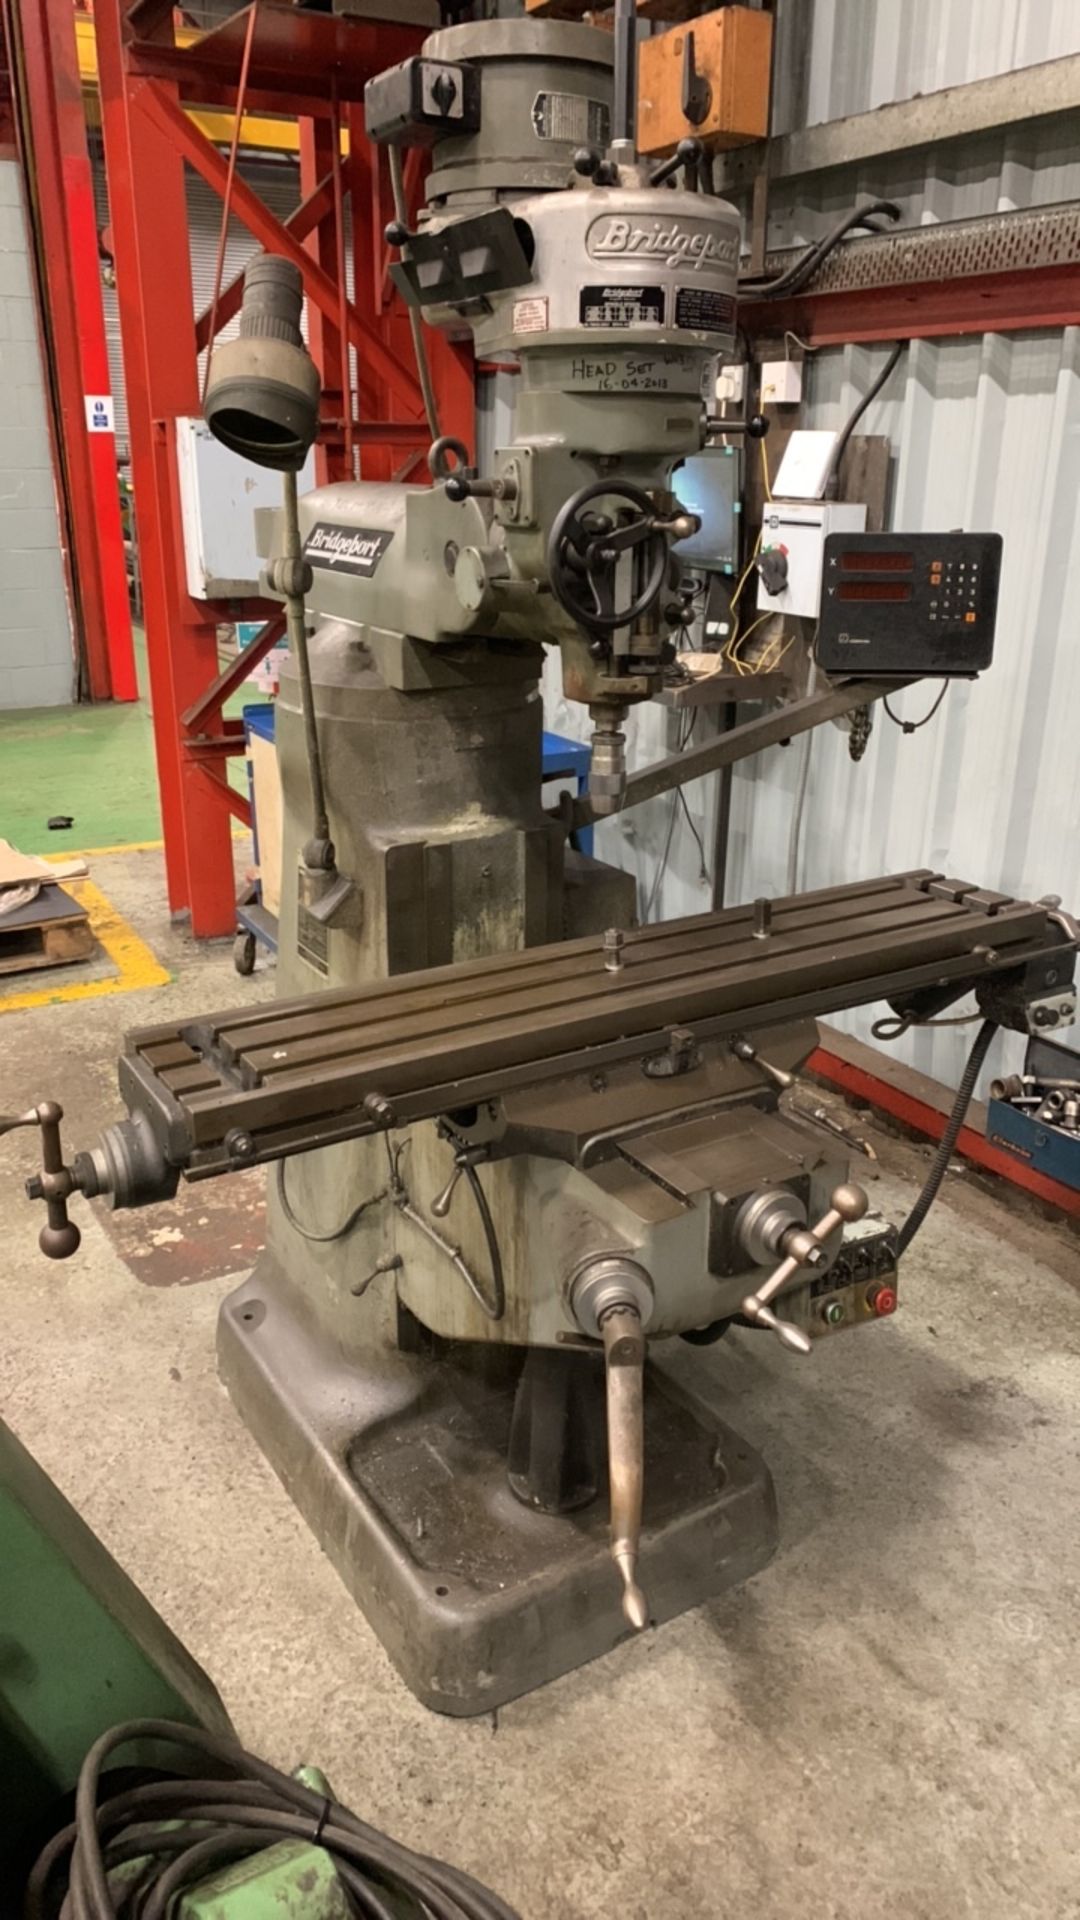 Bridgeport Turret Milling Machine , Serial No. 476901290 with Power Long Feed, Heidenhain 2 Axis DRO - Image 2 of 6